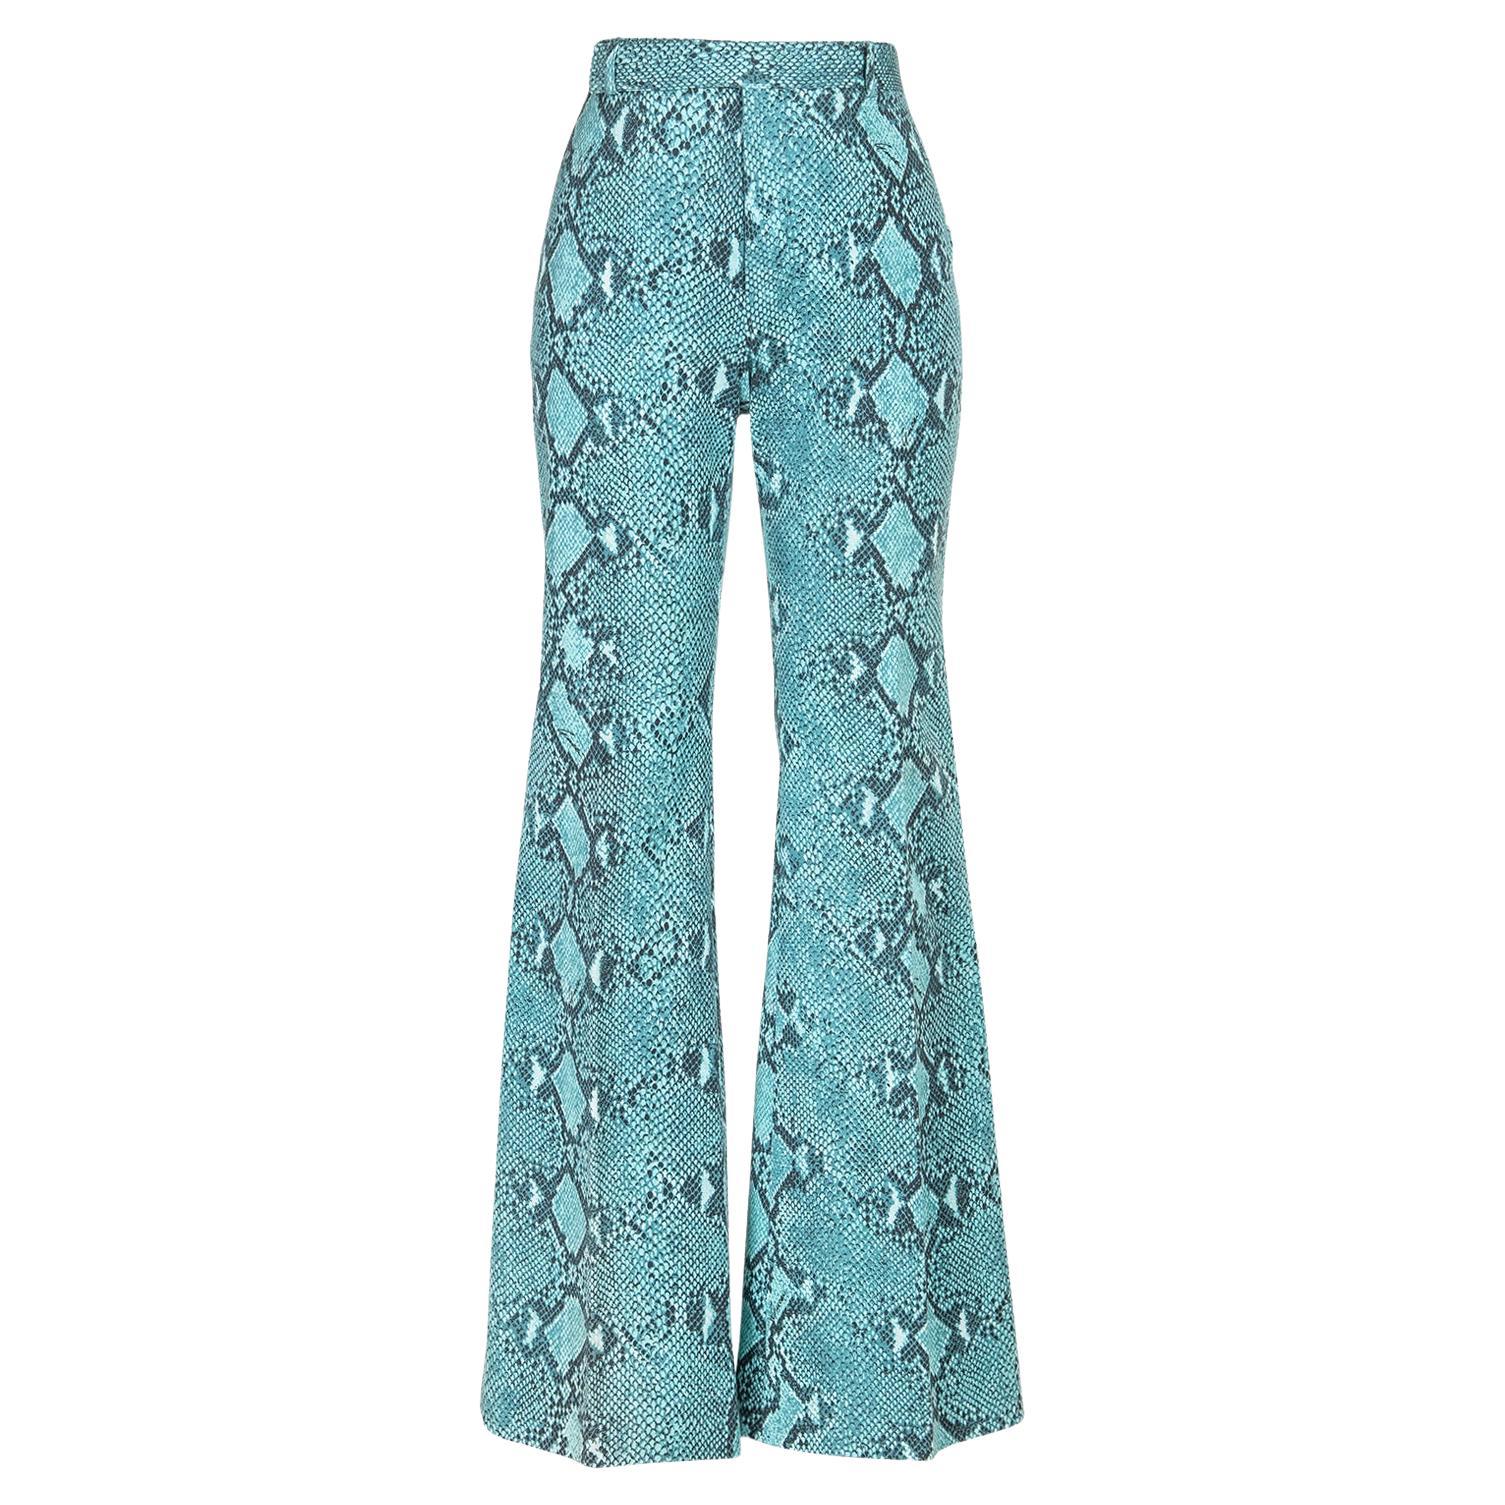 S/S 2000 Gucci by Tom Ford Turquoise Snakeskin Trousers